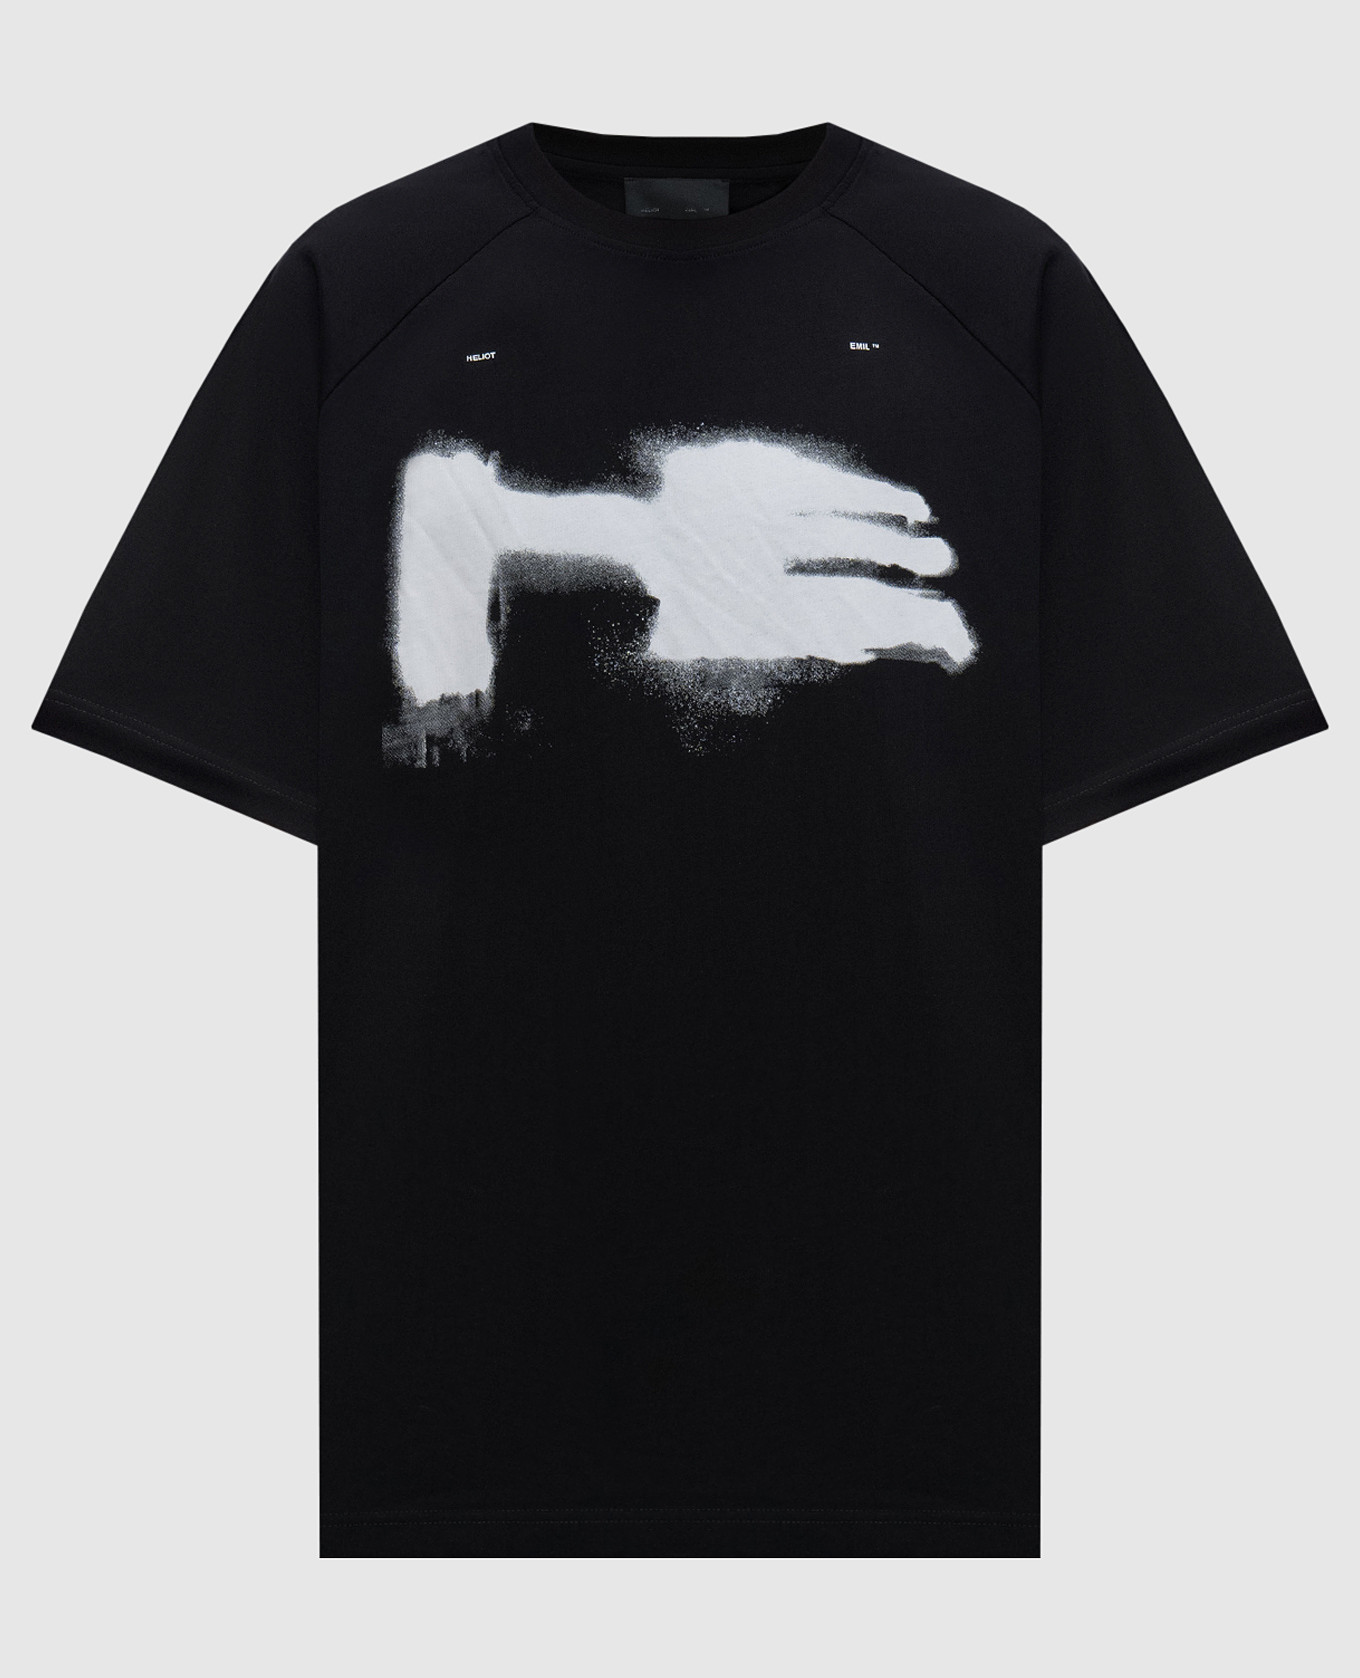 Black T-shirt by Xylem with a print